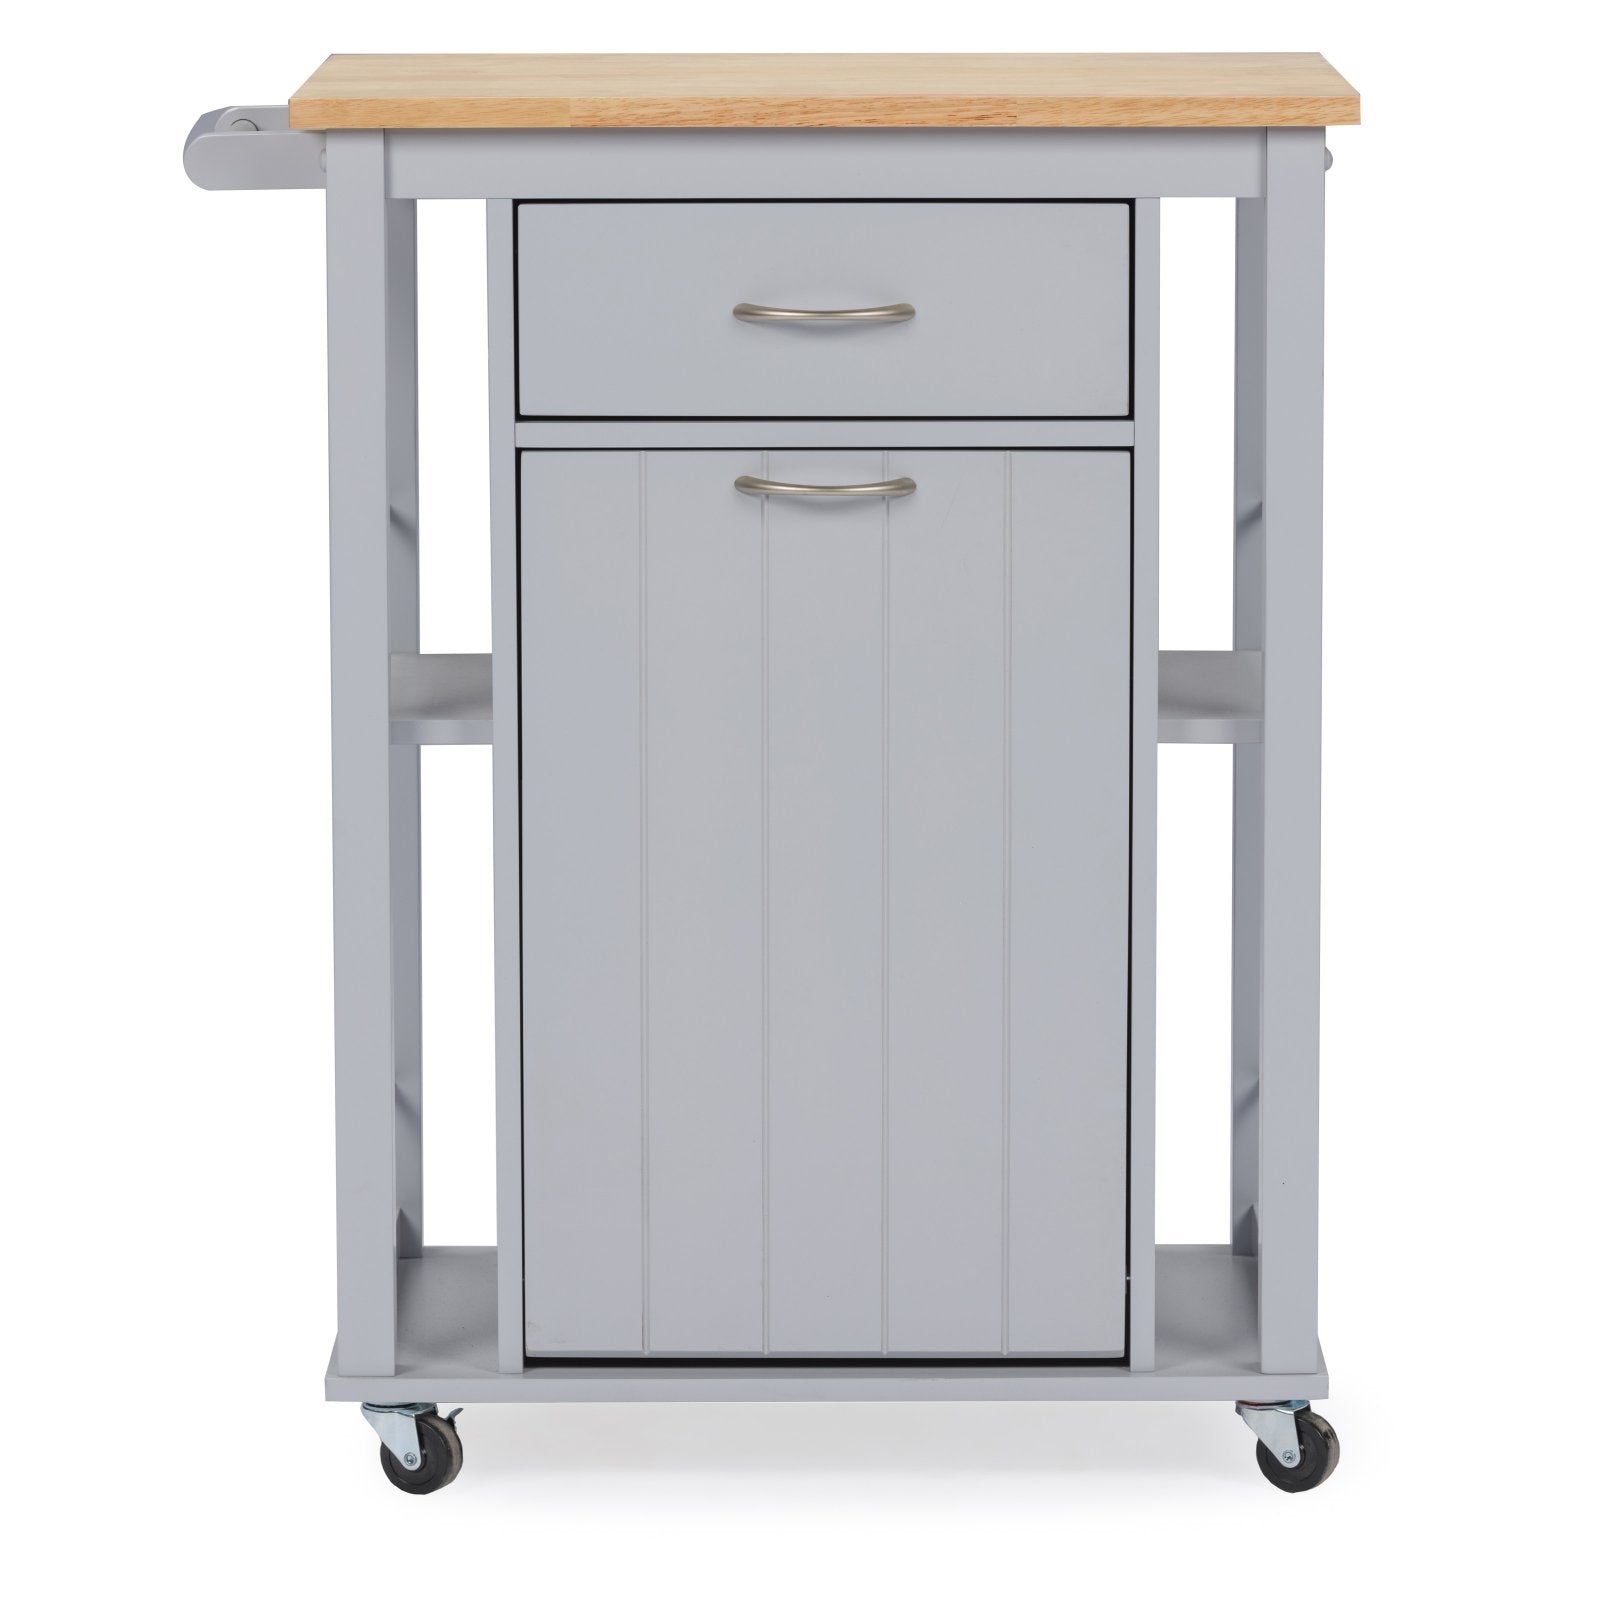 Baxton Studio RT311-OCC Yonkers Contemporary Light Grey Kitchen Cart with Wood Top - 34.38 x 25.5 x 16.88 in.